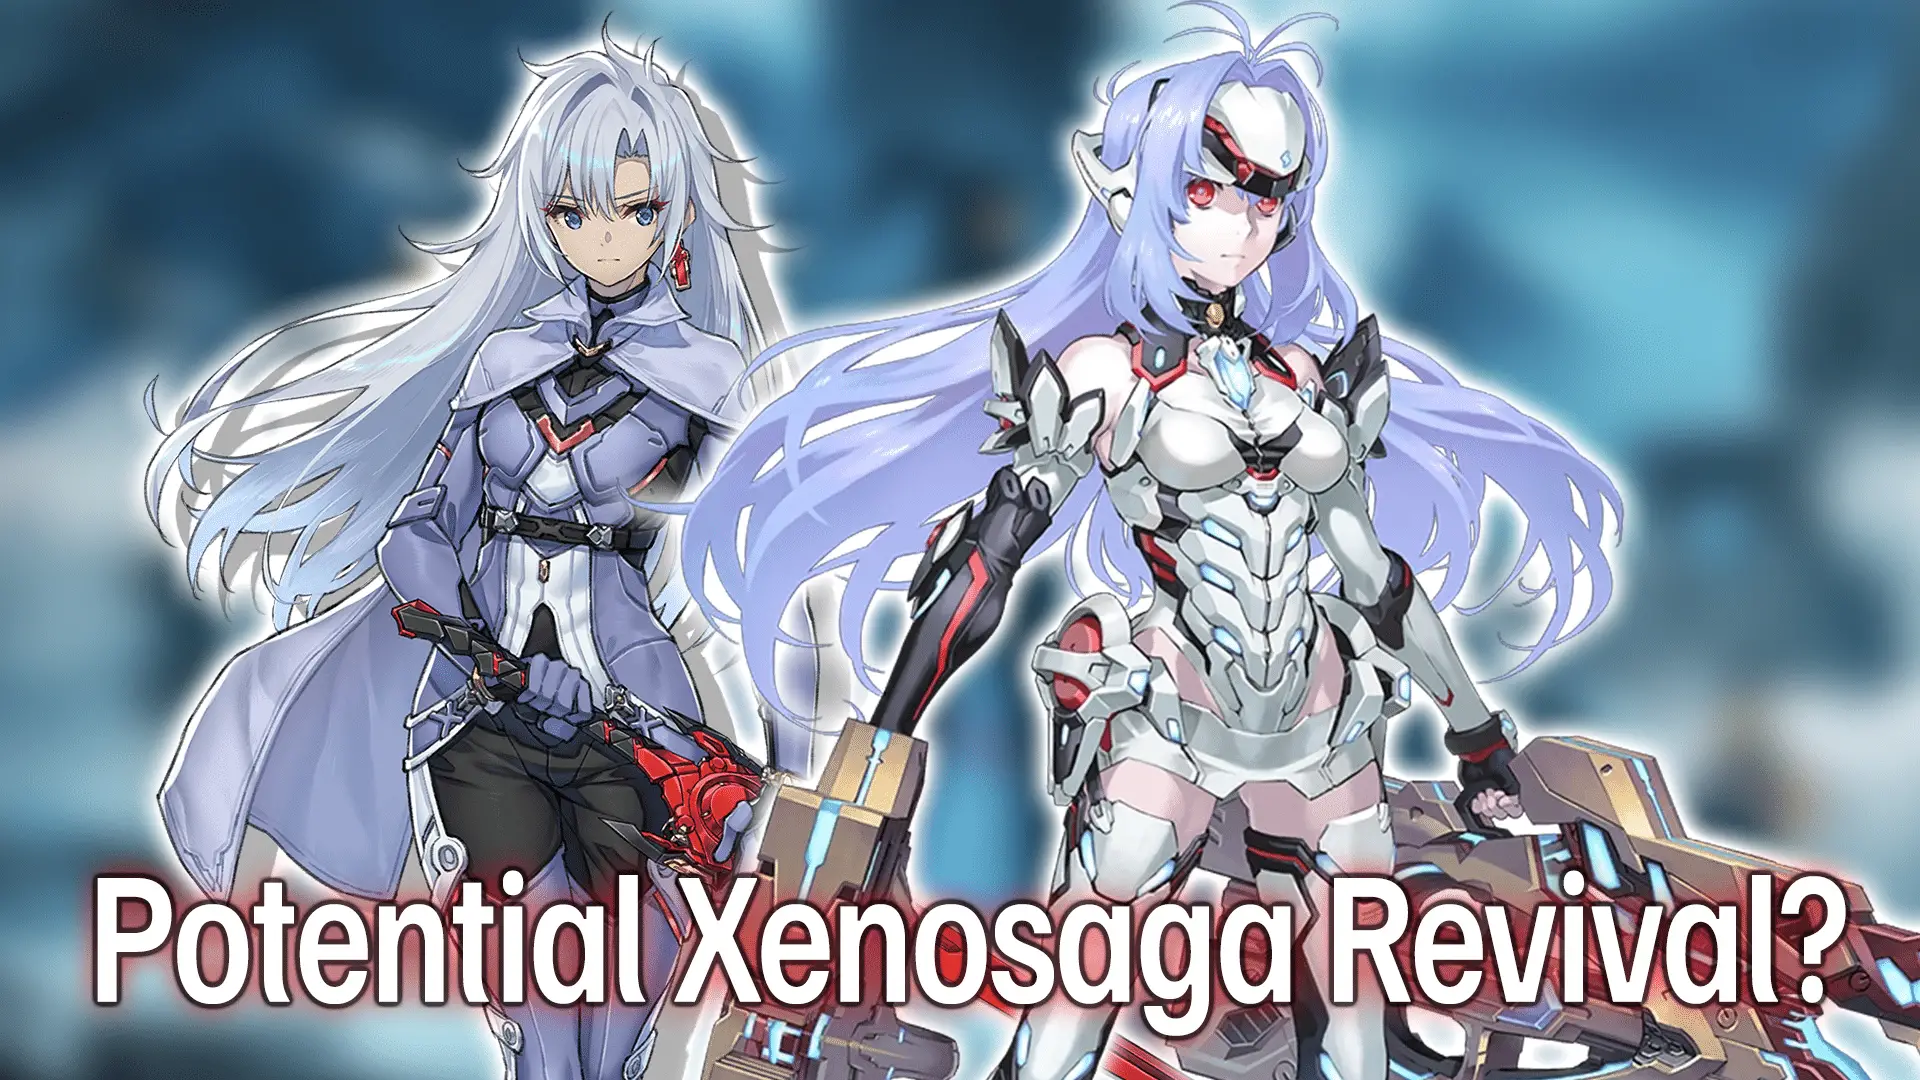 Xenoblade Chronicles 3 Future Redeemed DLC Now Available - Noisy Pixel